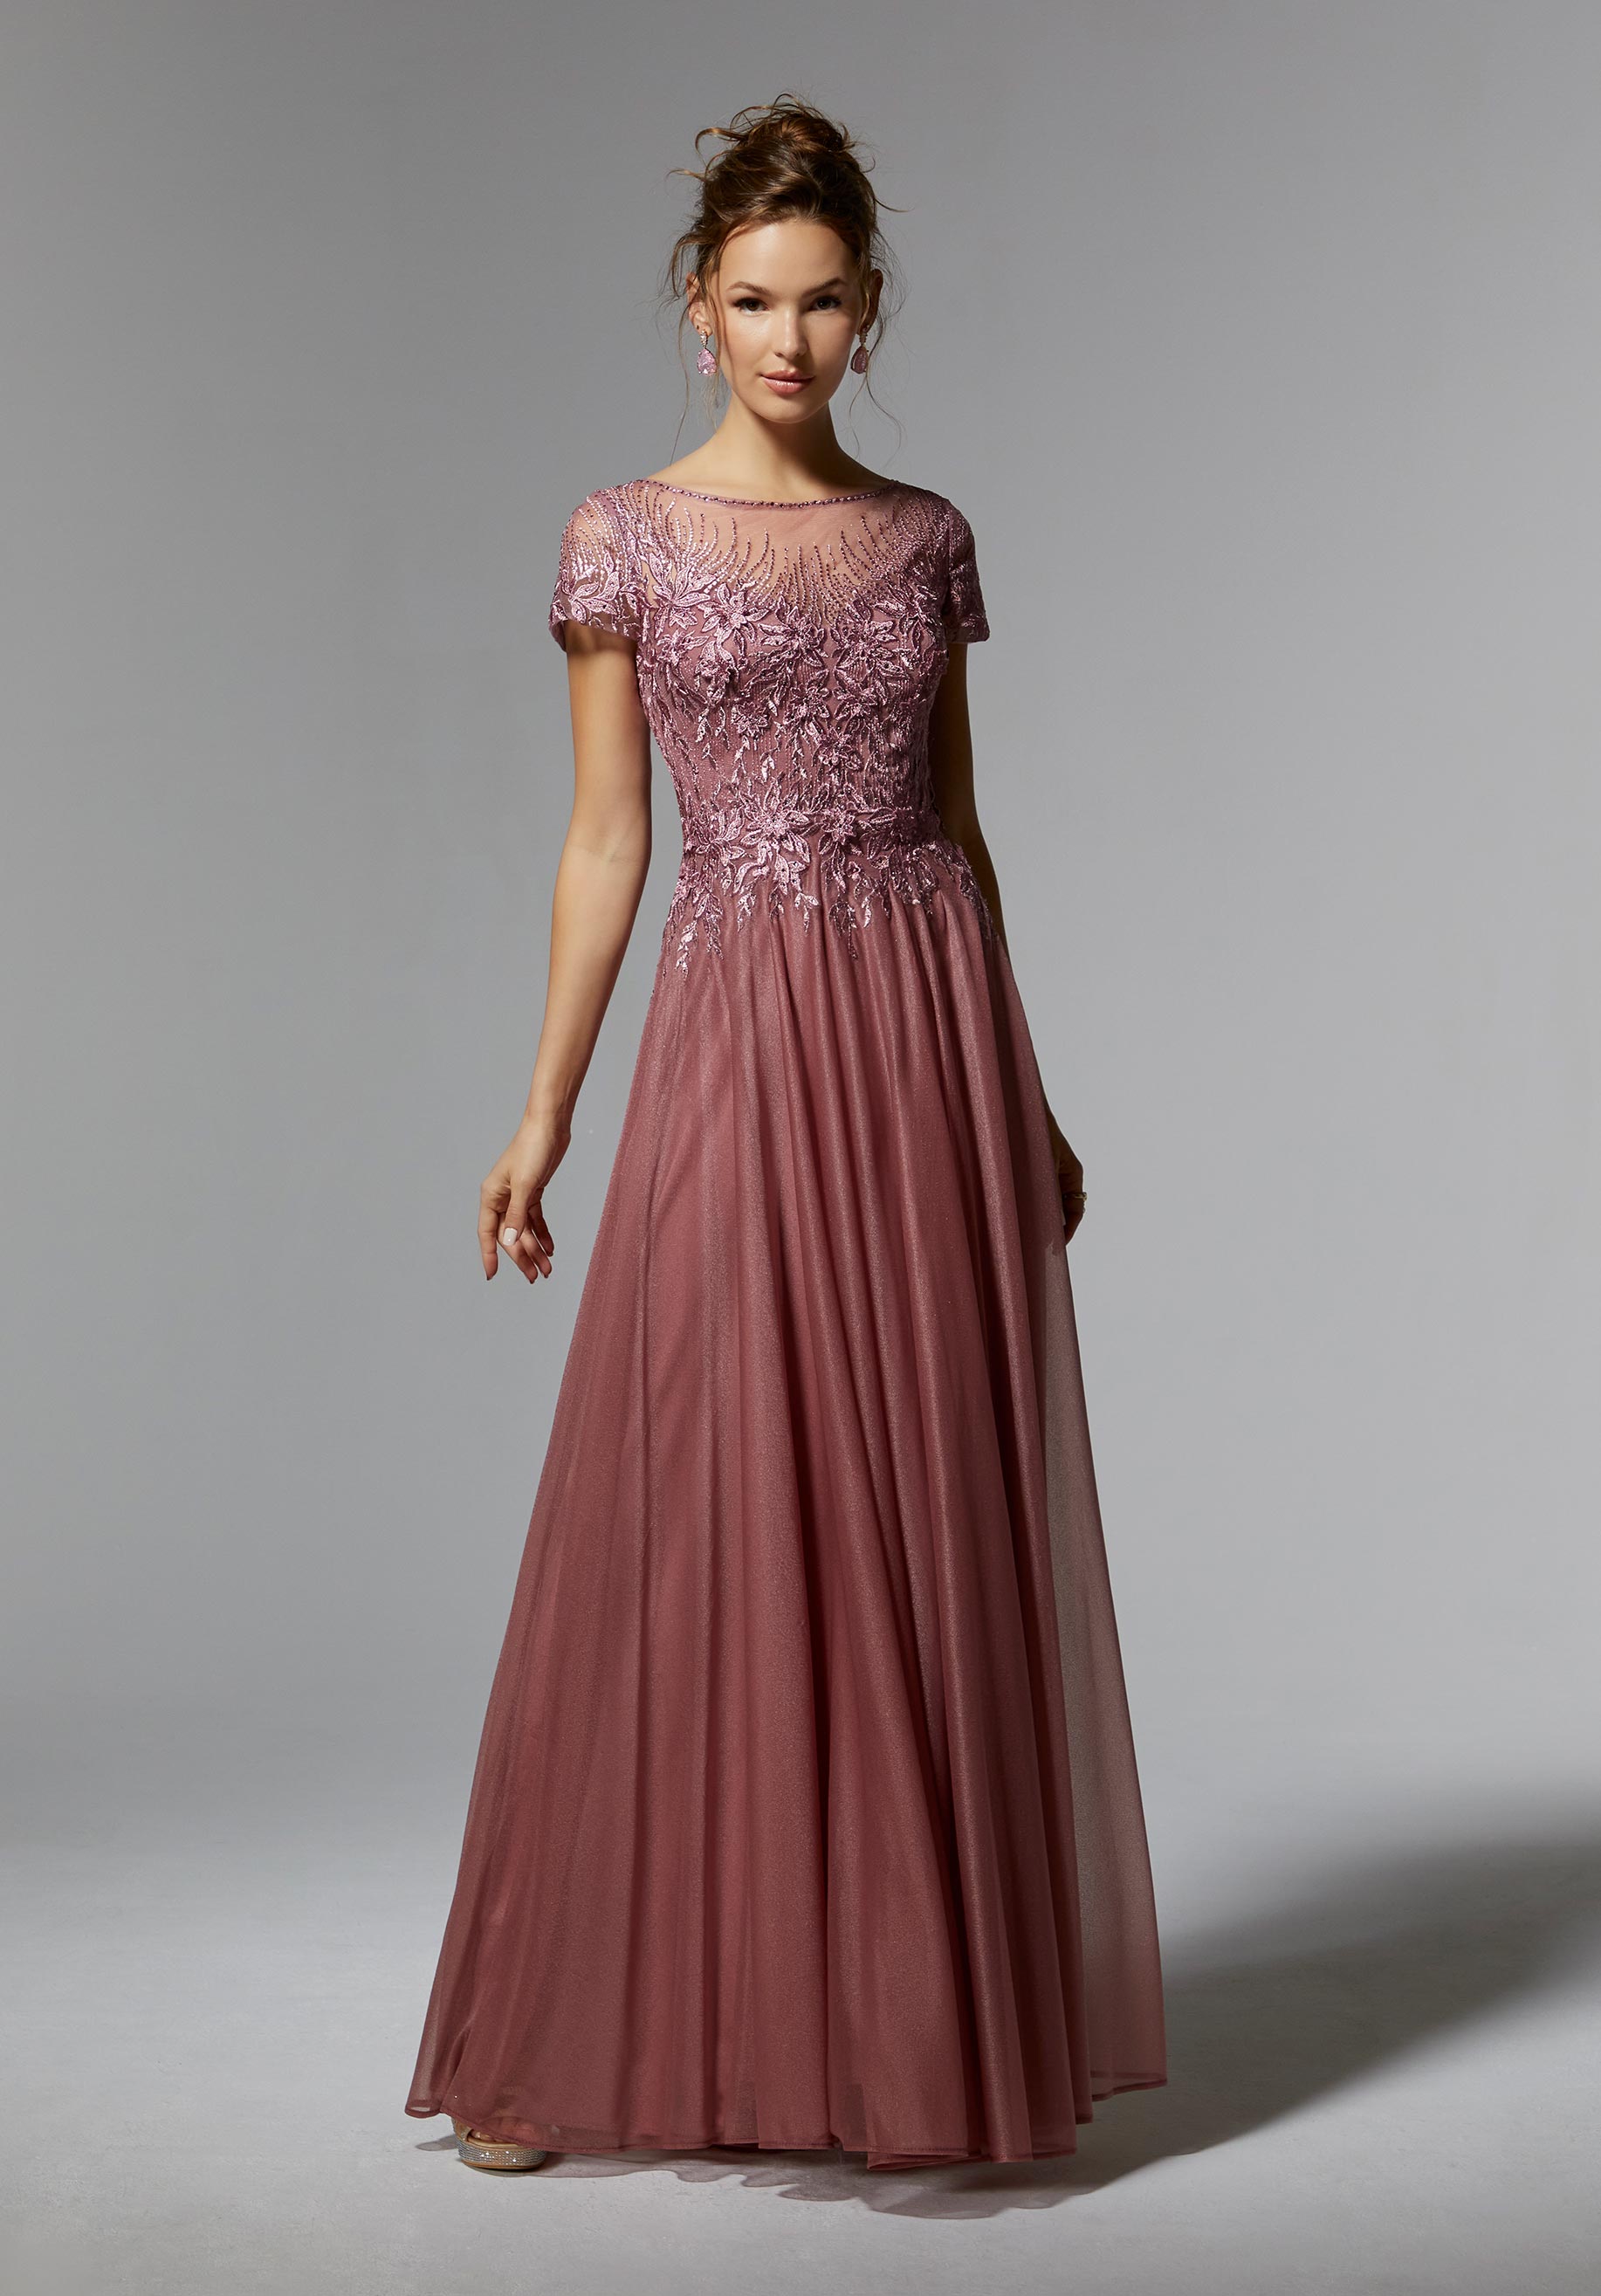 Discover more than 135 a shape gown design